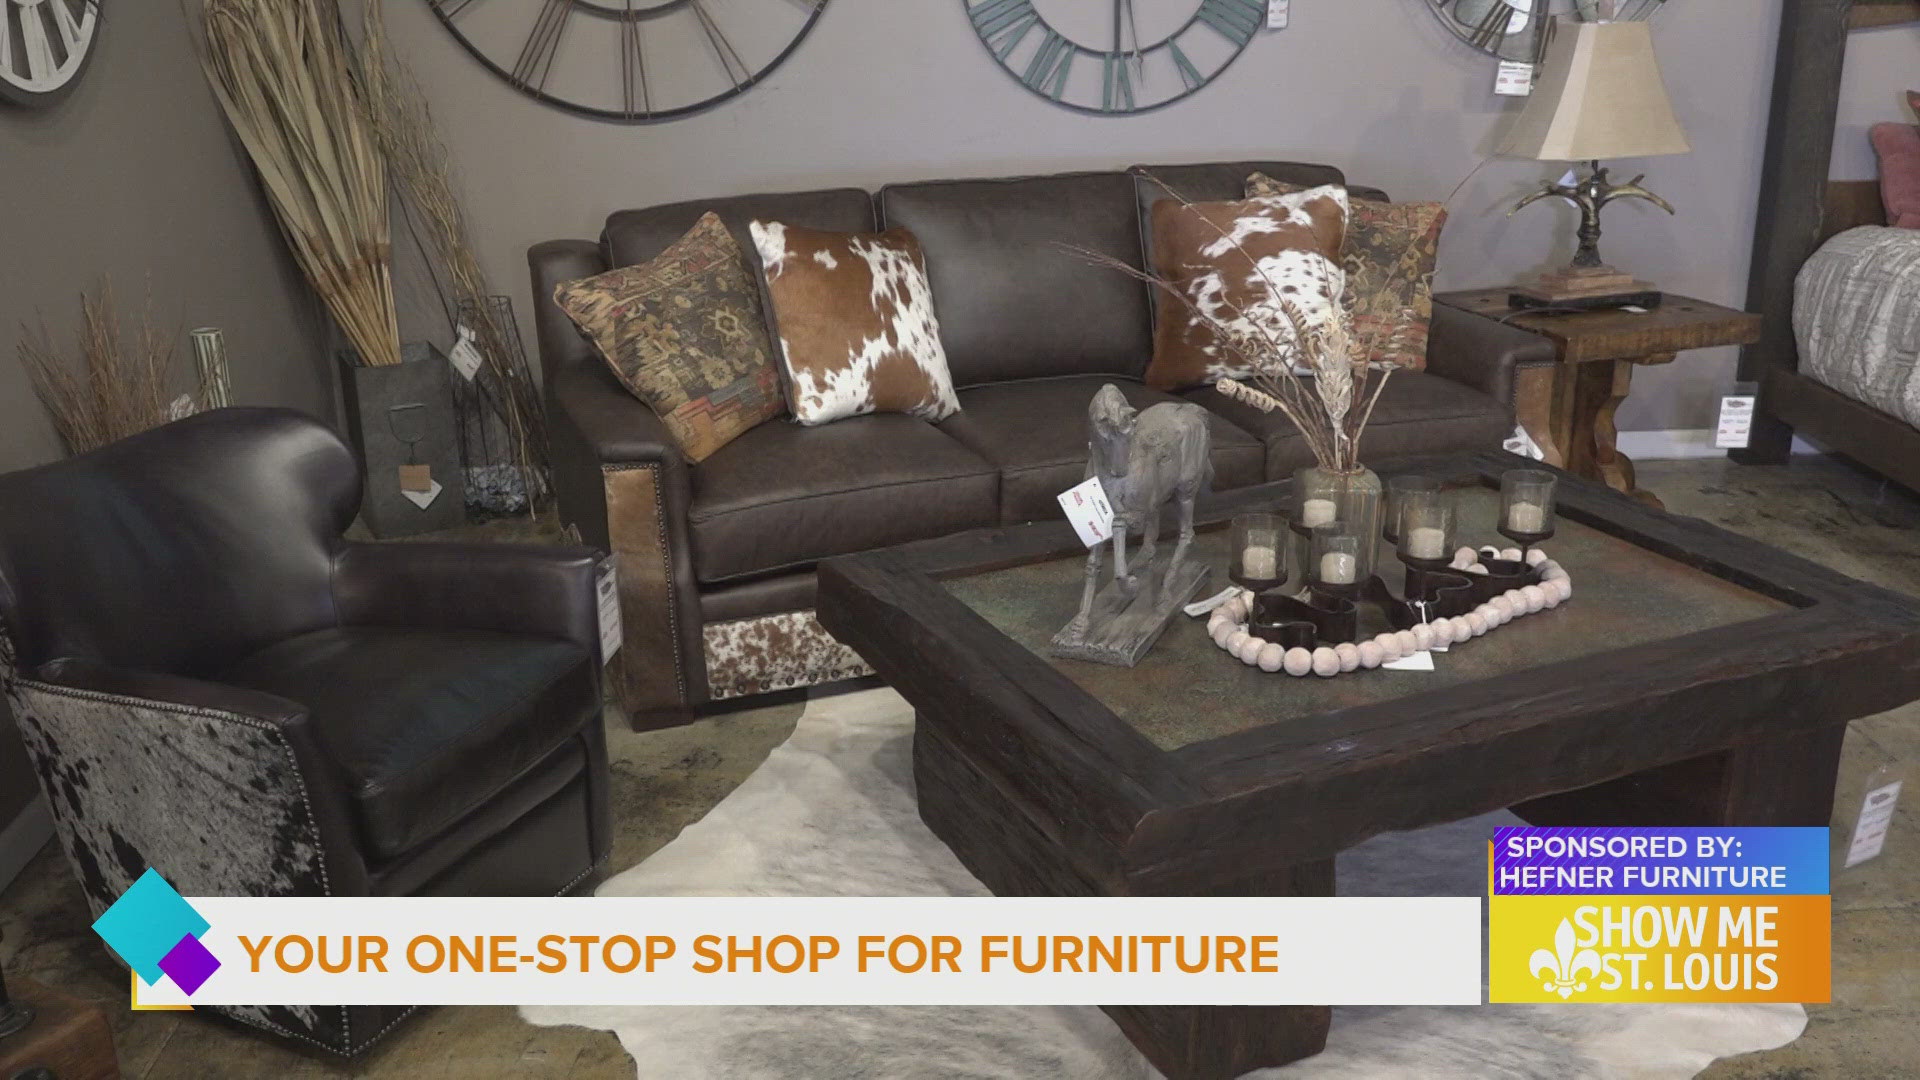 Hefner Furniture and Appliance has the largest furniture selection in Missouri. They have a massive 5 ½ acre store with all the top name brands.